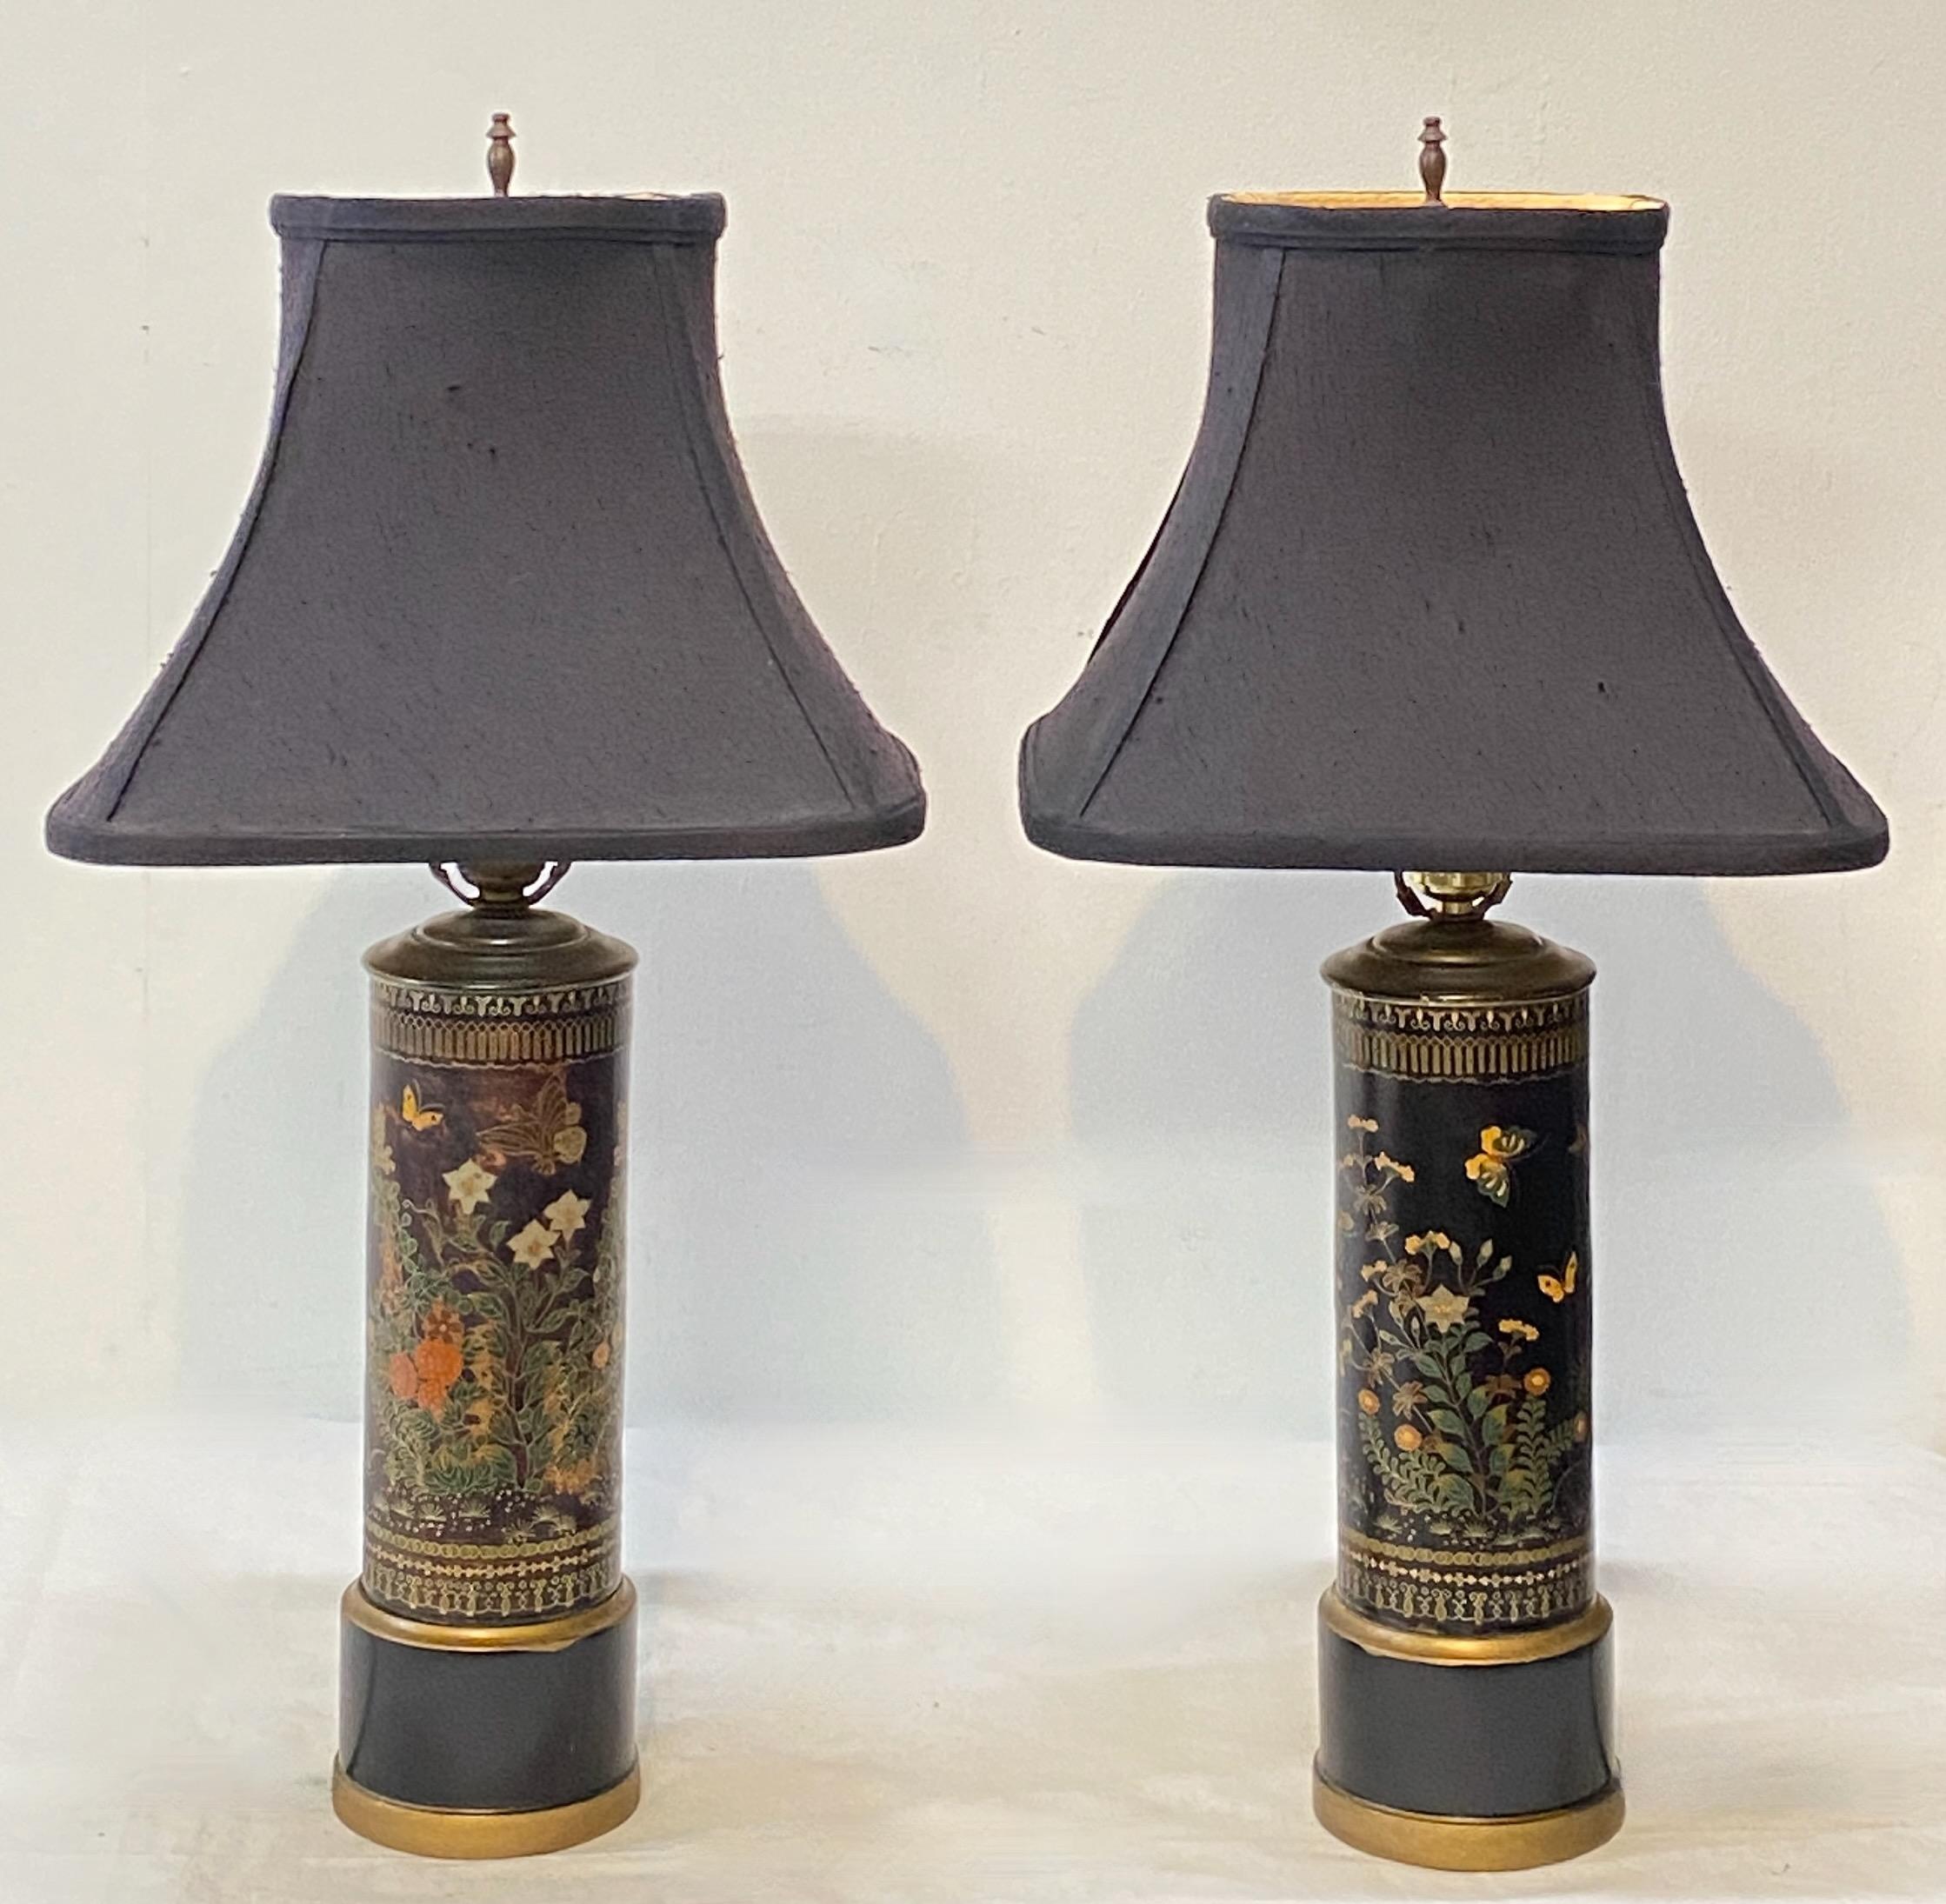 A pair of beautiful quality Japanese Satsuma pottery lamps with detailed brass wire-work cloisonné enamel decoration.
Originally these were wig stands, converted to lamps in the early 20th century.
In excellent antique condition.
Japan Meiji